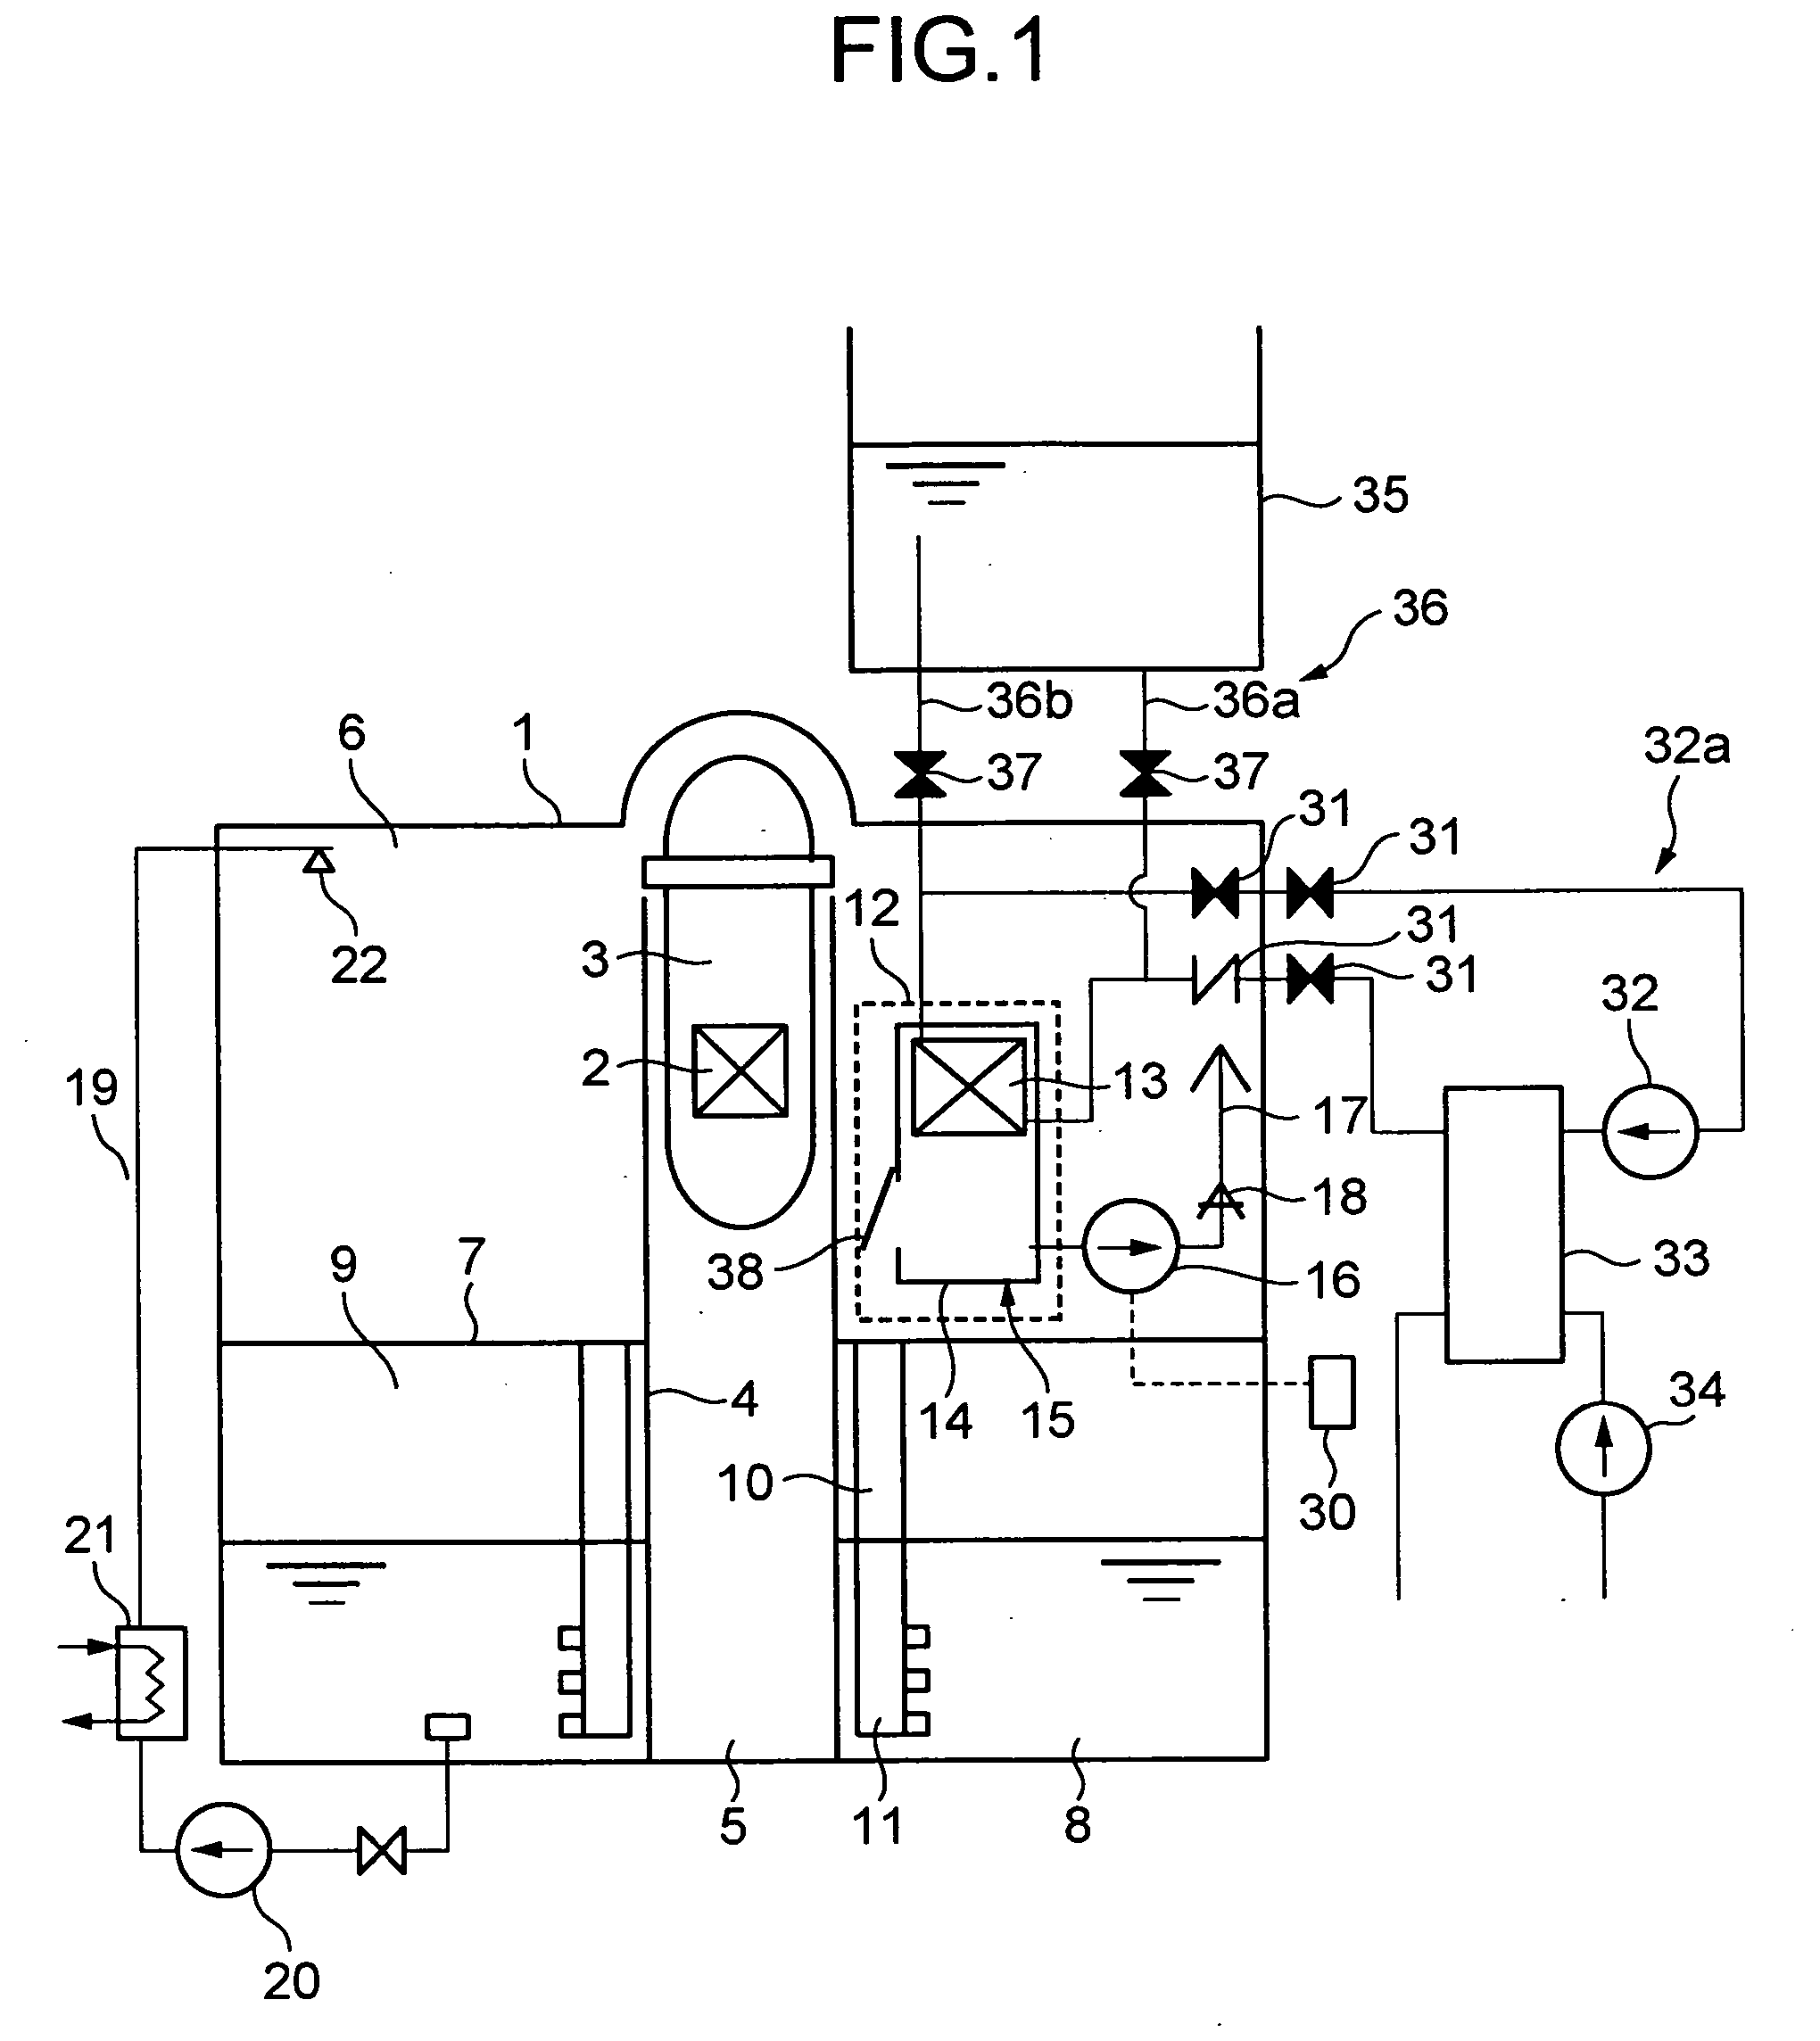 Reactor containment vessel cooling equipment